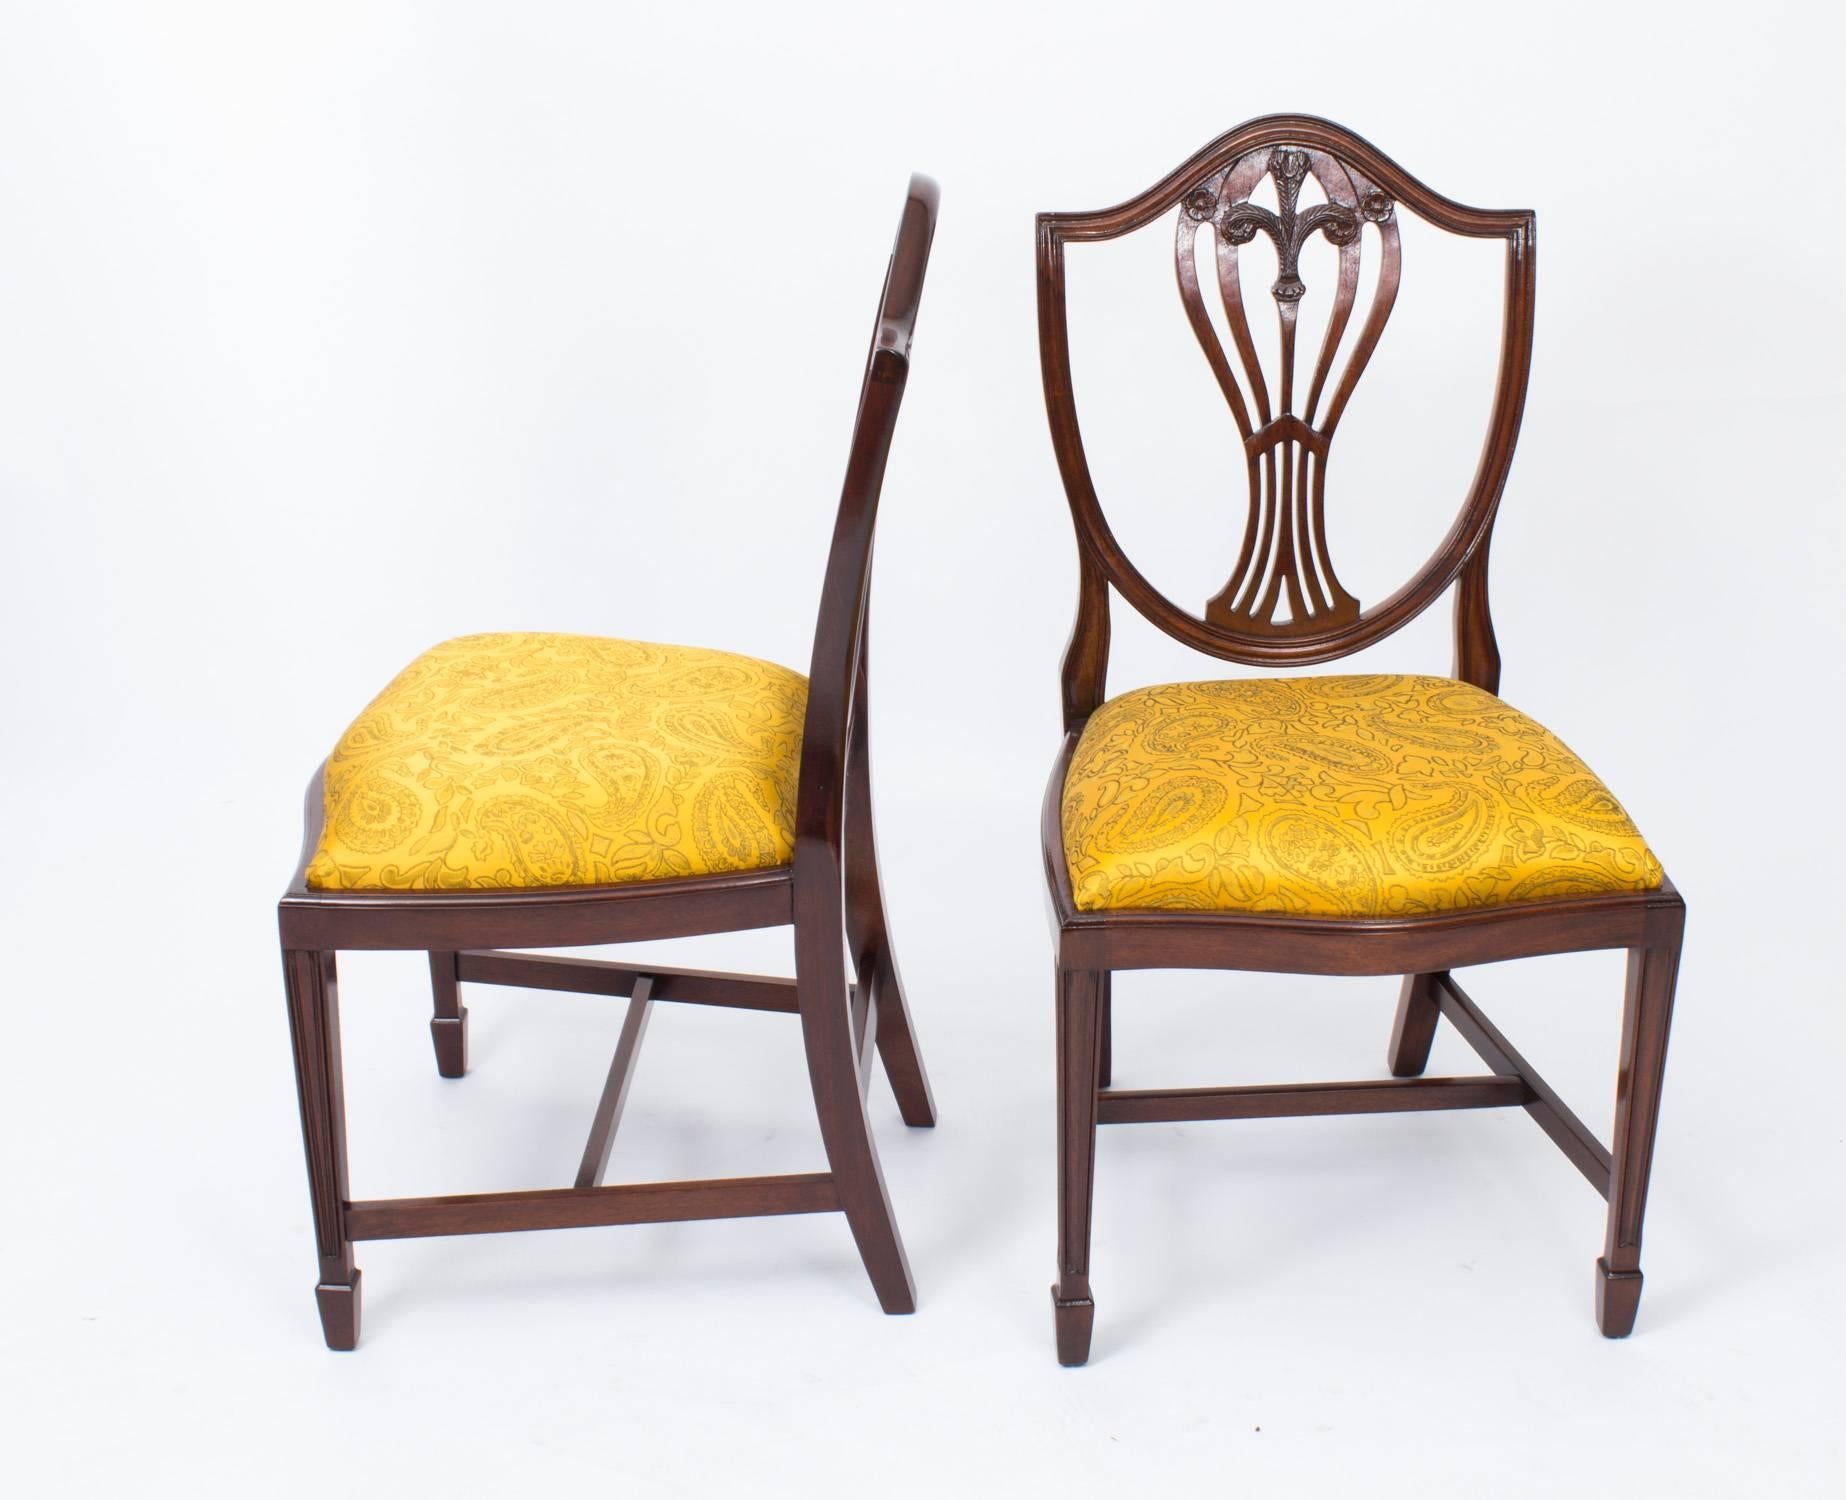 An absolutely fantastic English made set of ten Hepplewhite style Shield Back dining chairs, dating from the mid-20th century.

These chairs have been masterfully crafted in beautiful solid mahogany with hand-carved decoration throughout and the